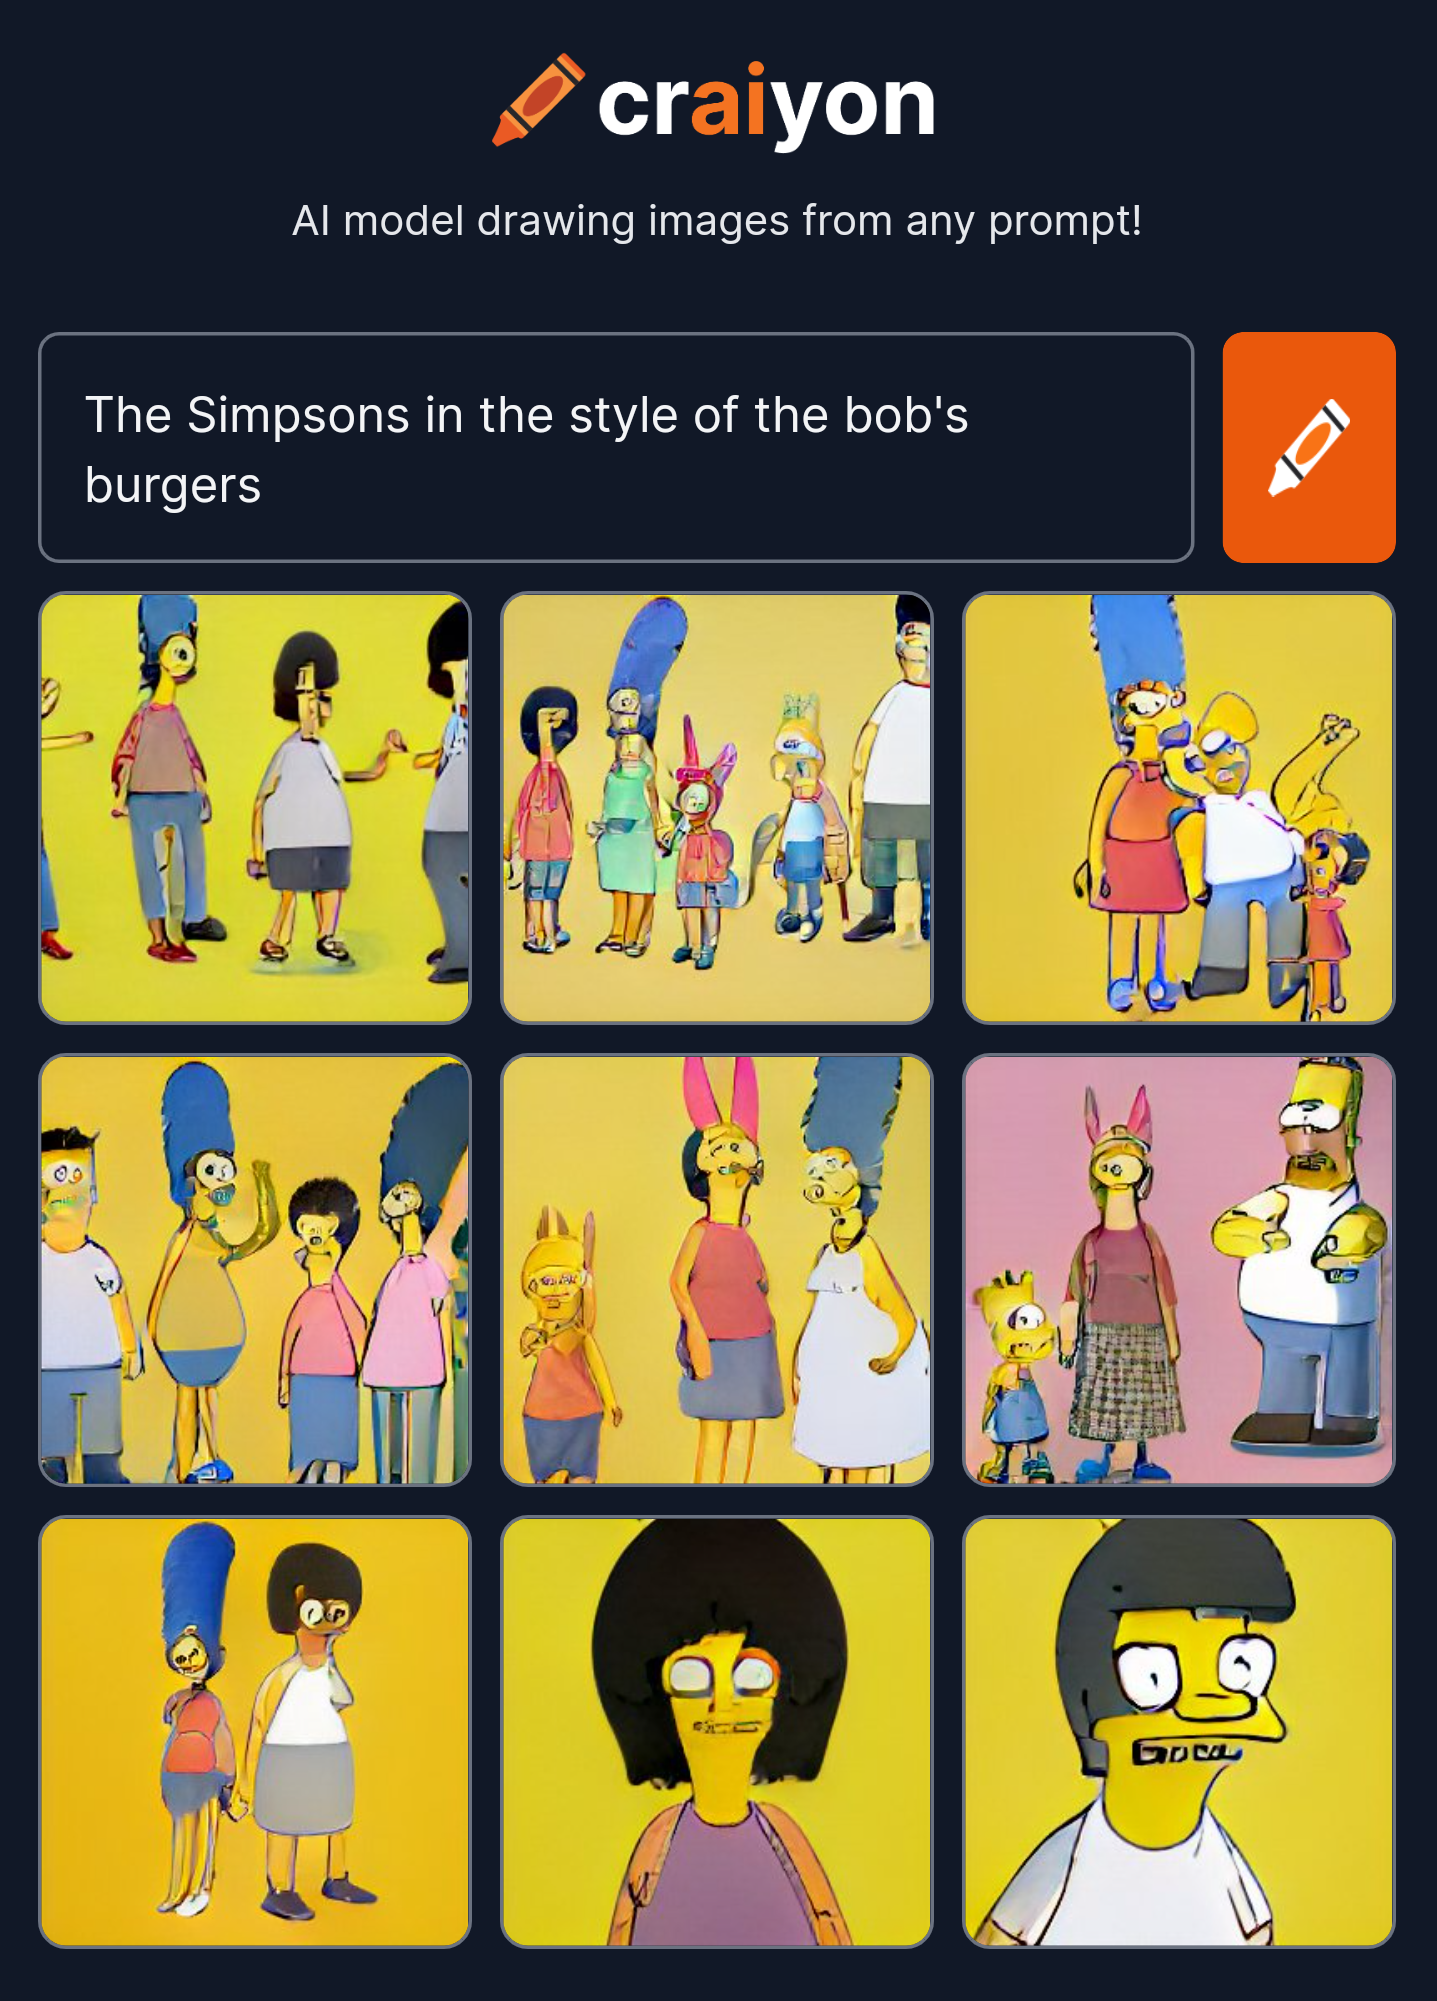 craiyon_212317_The_Simpsons_in_the_style_of_the_bob_s_burgers.jpg.png